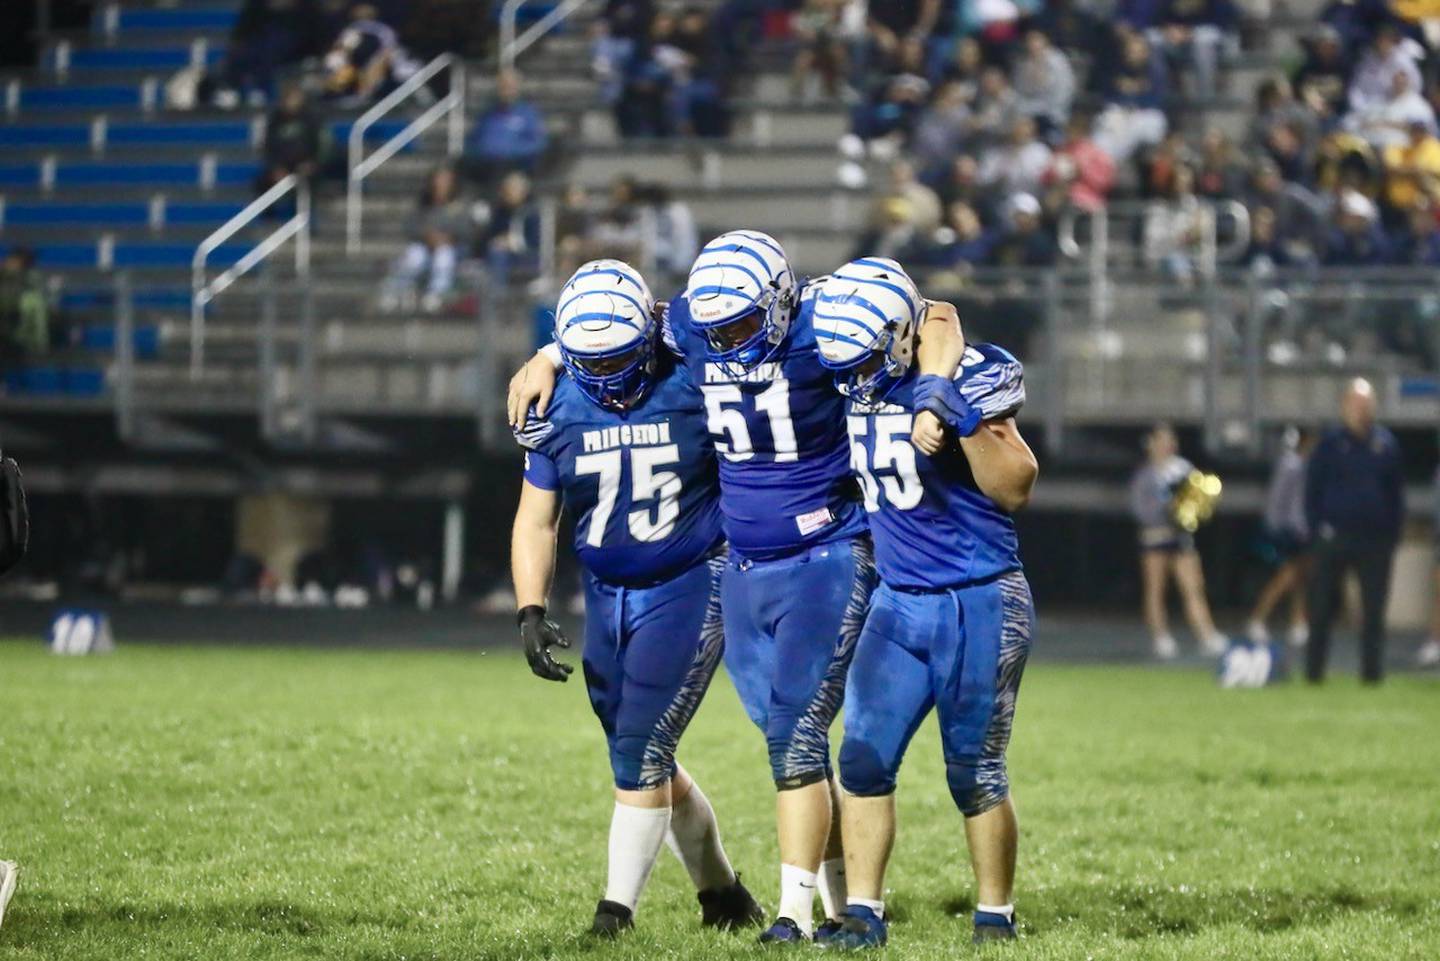 Princeton senior Bennett Williams (51) is helped off the field by teammates Payne Miller (75) and Jack May (55) after injuring his knee Friday night.